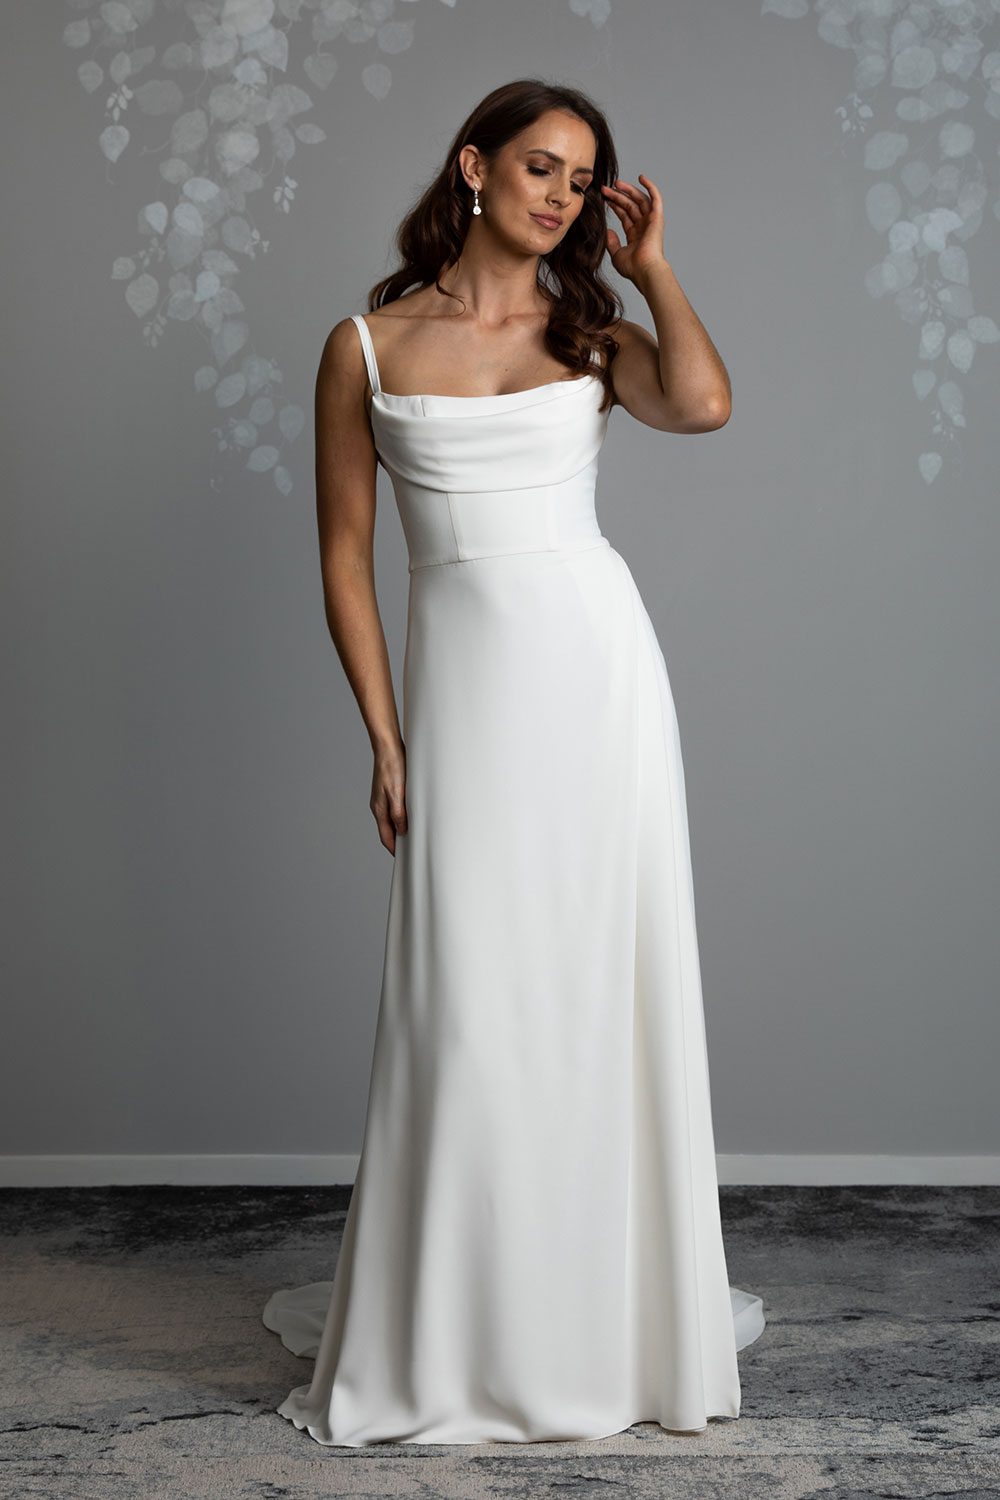 Evelyn Wedding Dress from Vinka Design. A divine gown made in a soft bridal crepe. It has a fitted bodice with soft draping over the bust line to flatter and enhance the figure. The straps compliment this detail by giving the bodice a softened square neckline. The skirt elegantly falls in folds from the side, revealing a flirtatious side split while in motion that falls closed again when still. Model with hand to face wearing softly draped fitted bodice with bridal crepe skirt